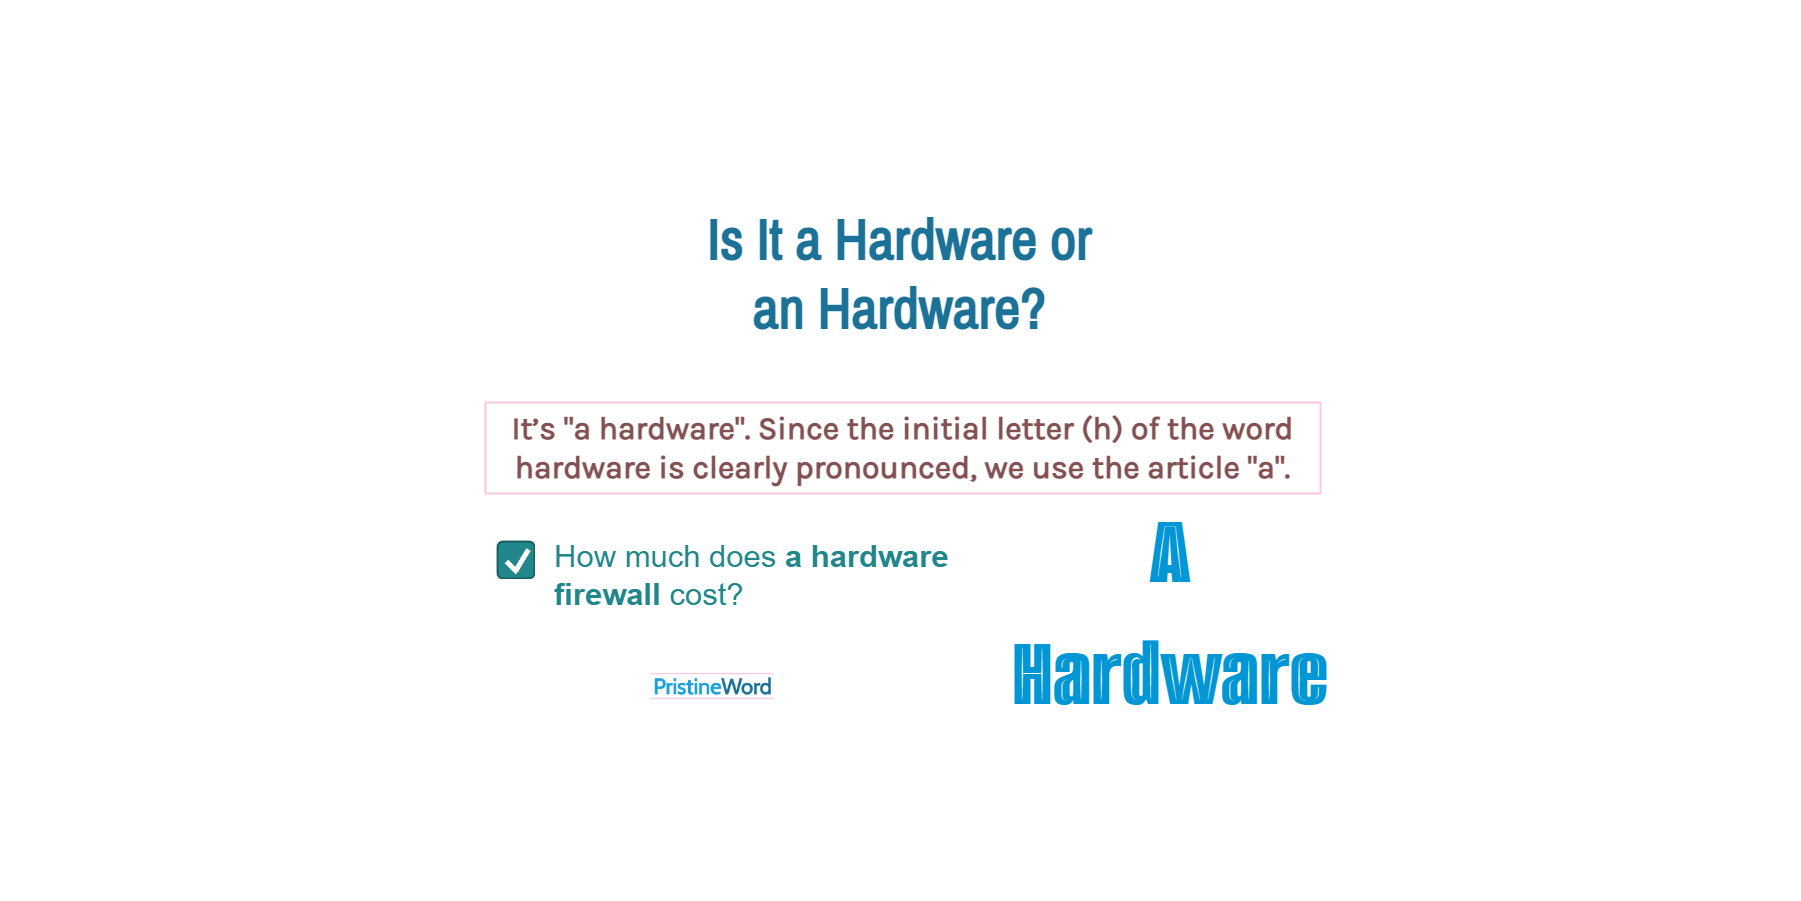 Is It a Hardware (HW) or an Hardware (HW)?